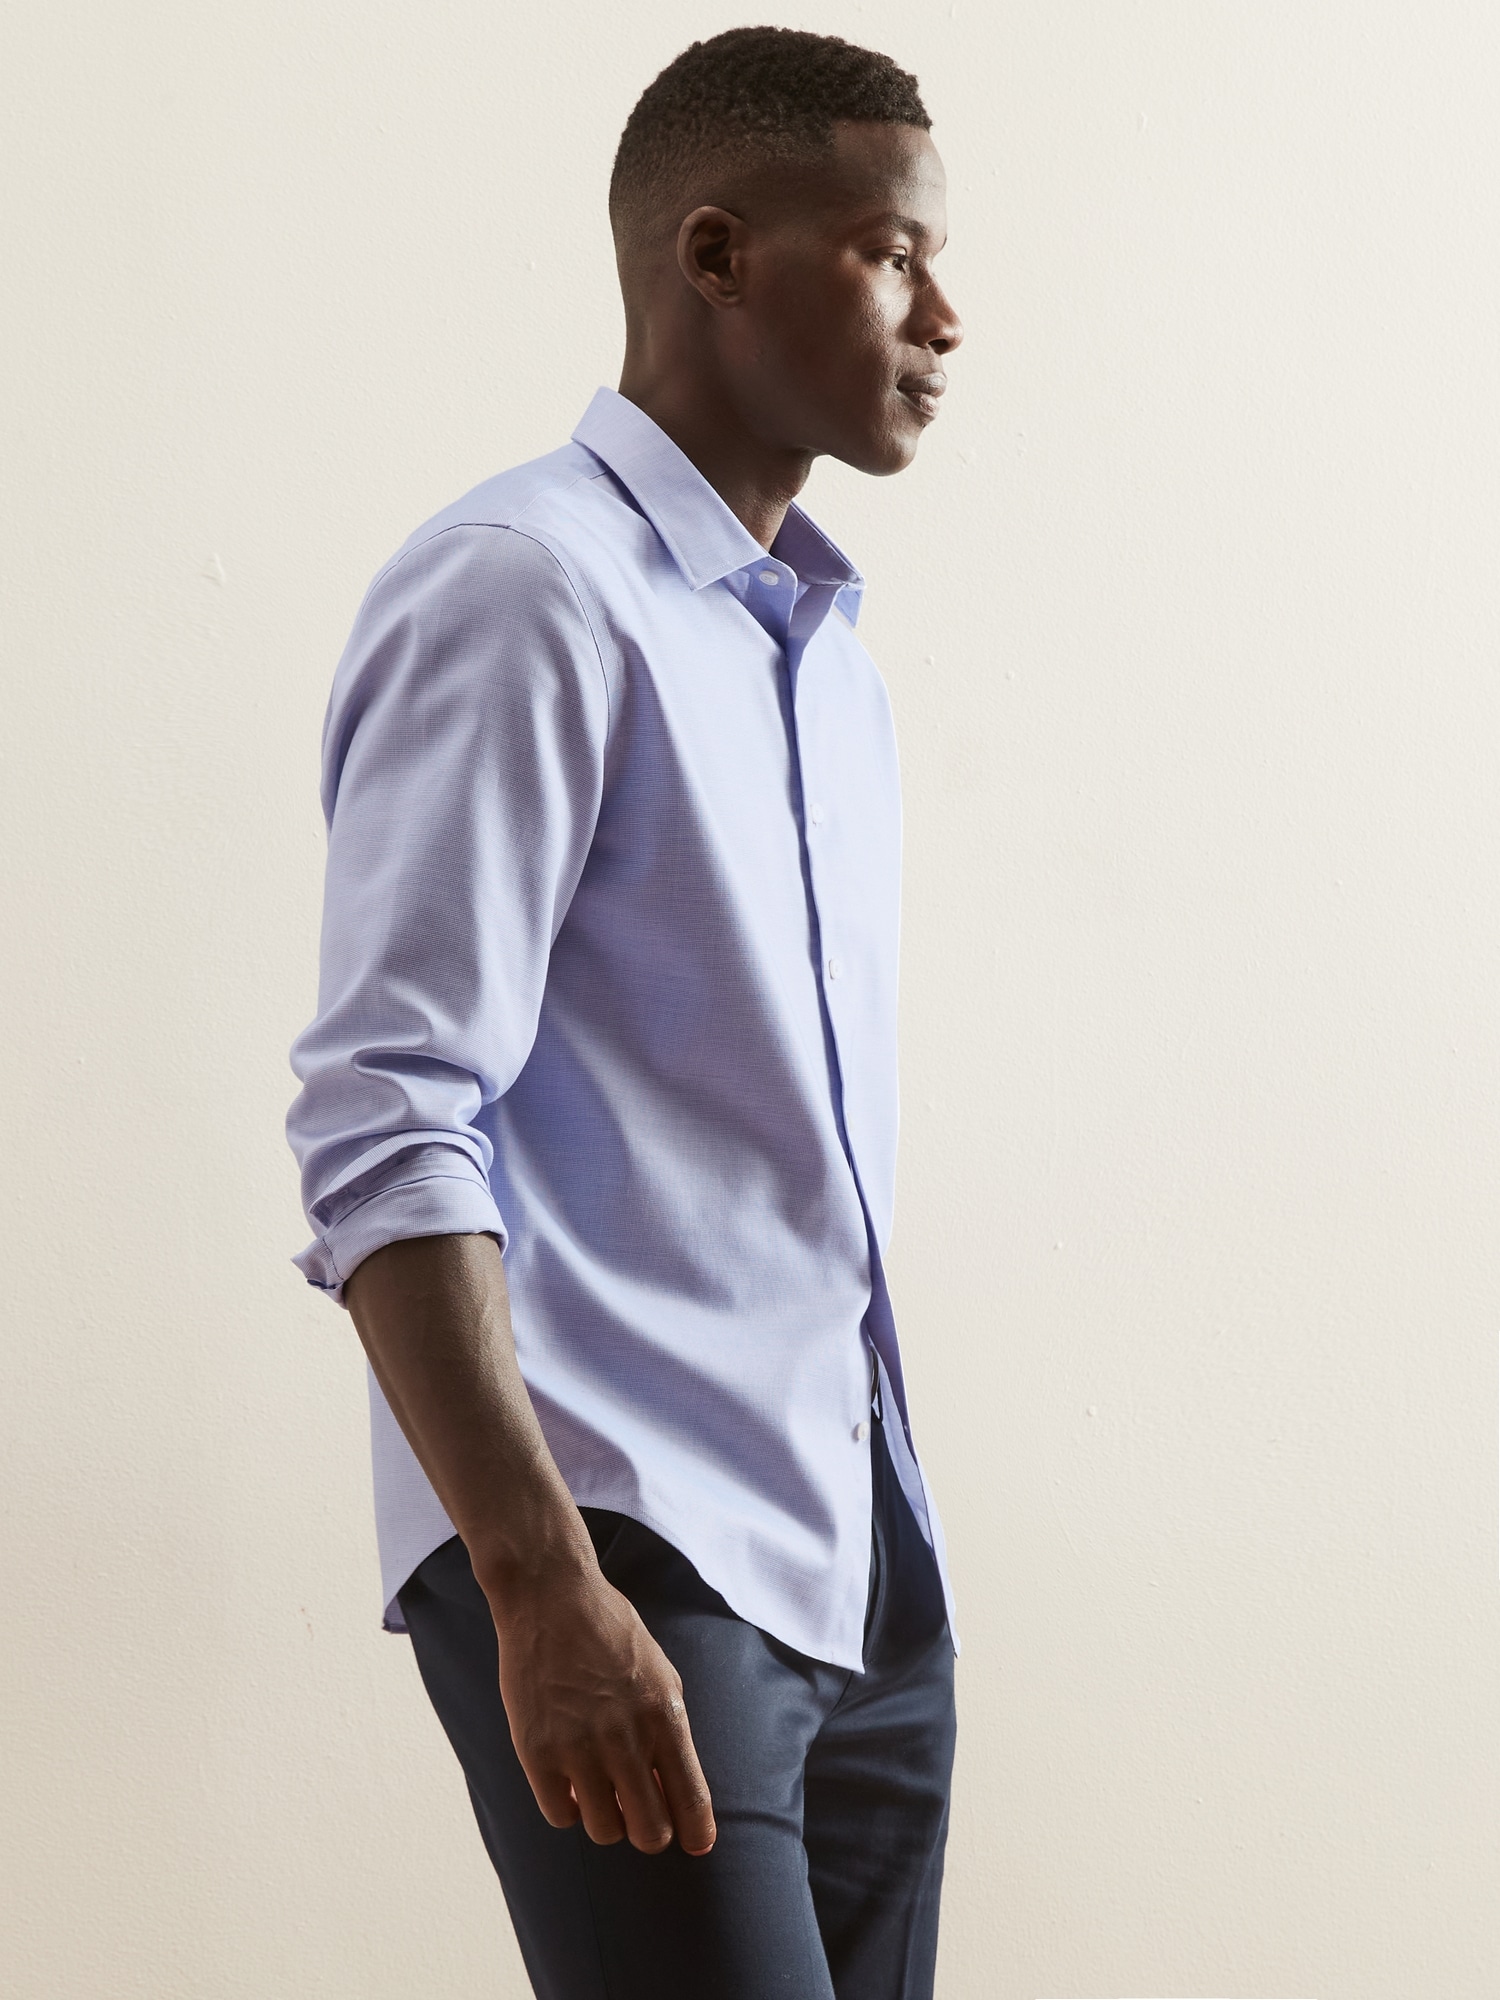 Slim-Fit Untucked Non-Iron Shirt